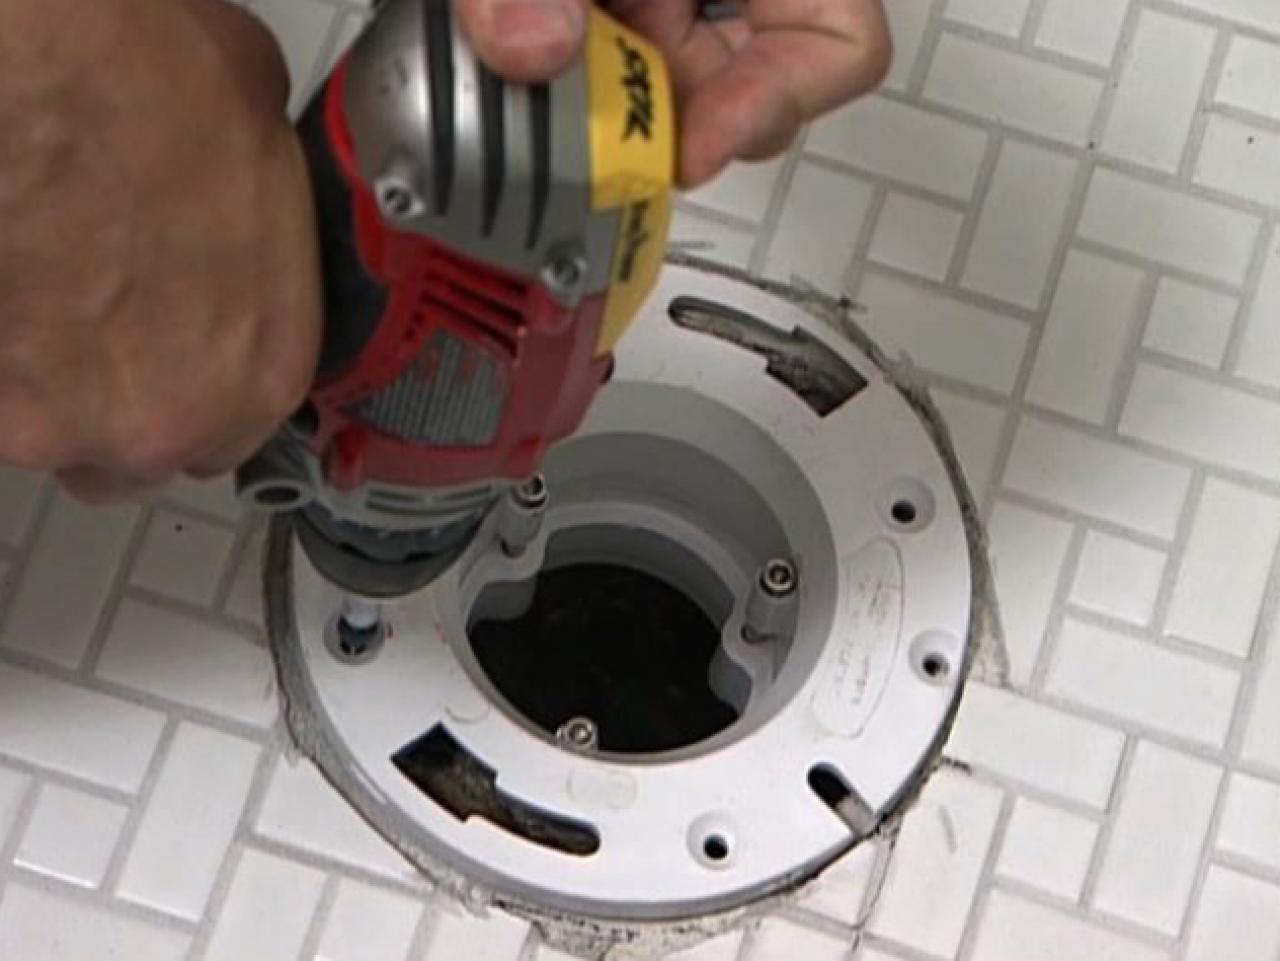 Install The Cove Base Tile And Toilet, Mounting A Toilet On Tile Floor